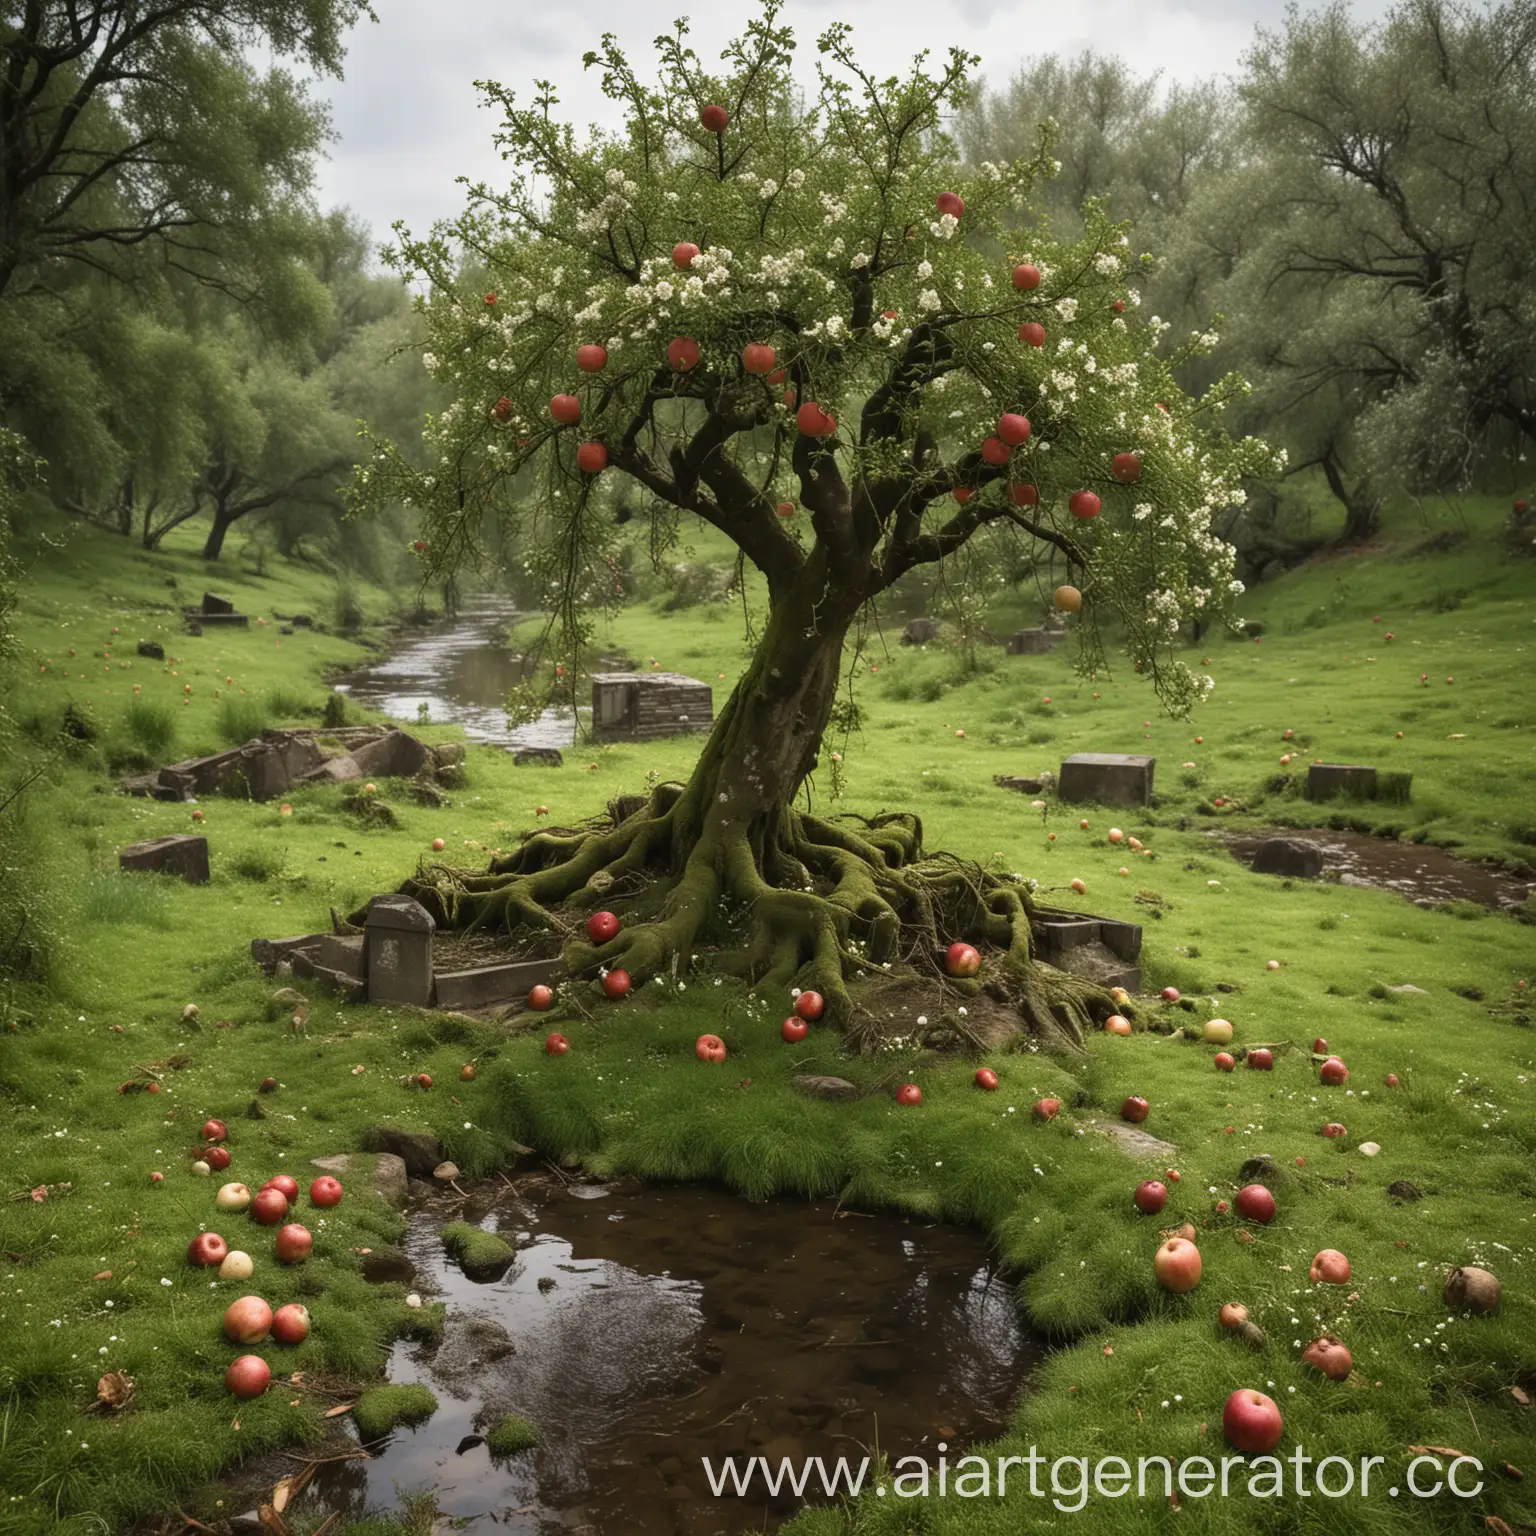 Mystical-Apple-Tree-by-the-River-with-Overgrown-Tomb